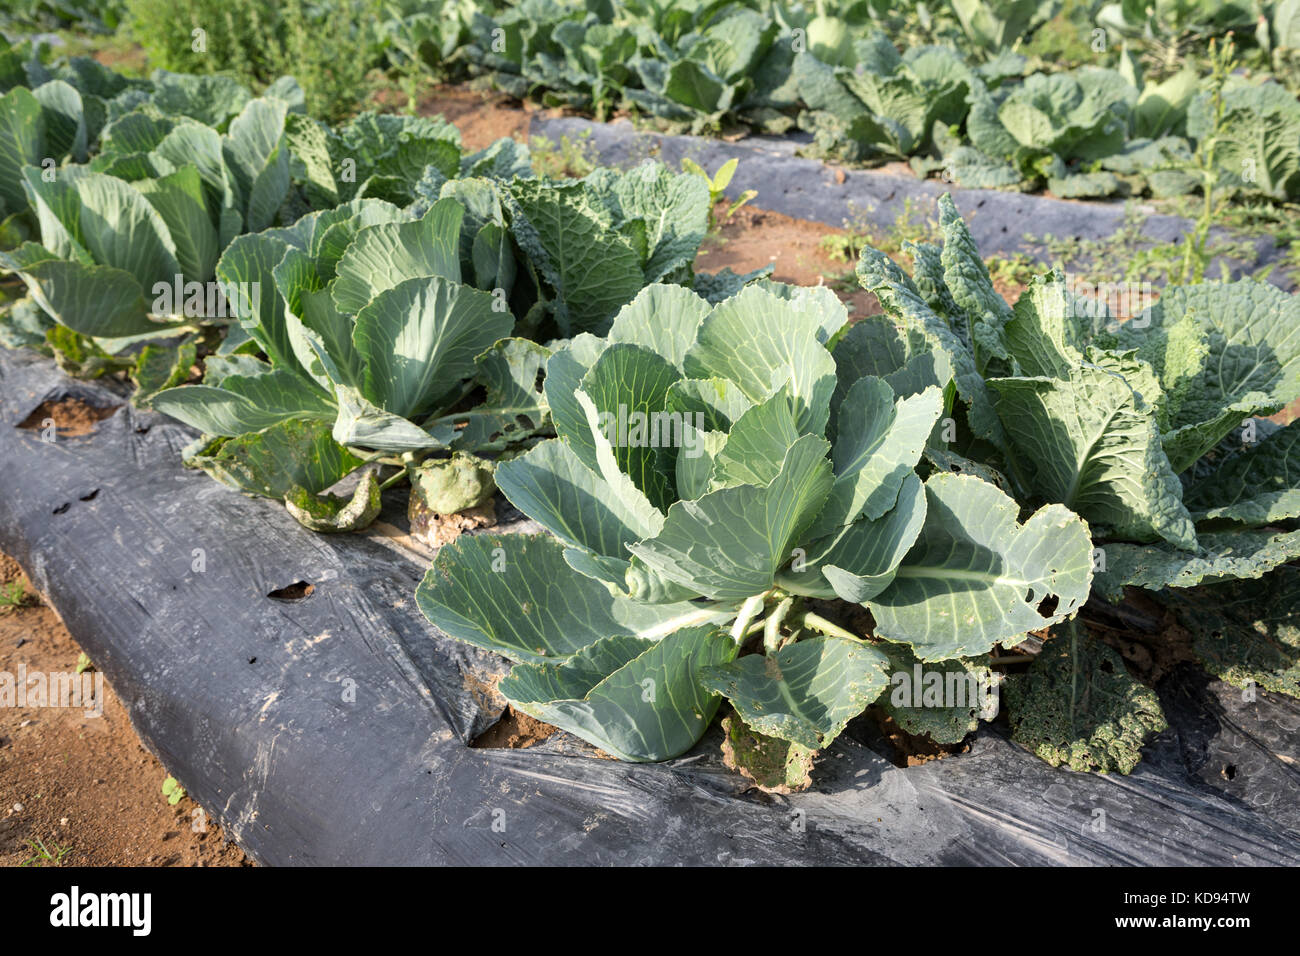 Cabbage growing in lines outdoor in plastic mulch. Stock Photo